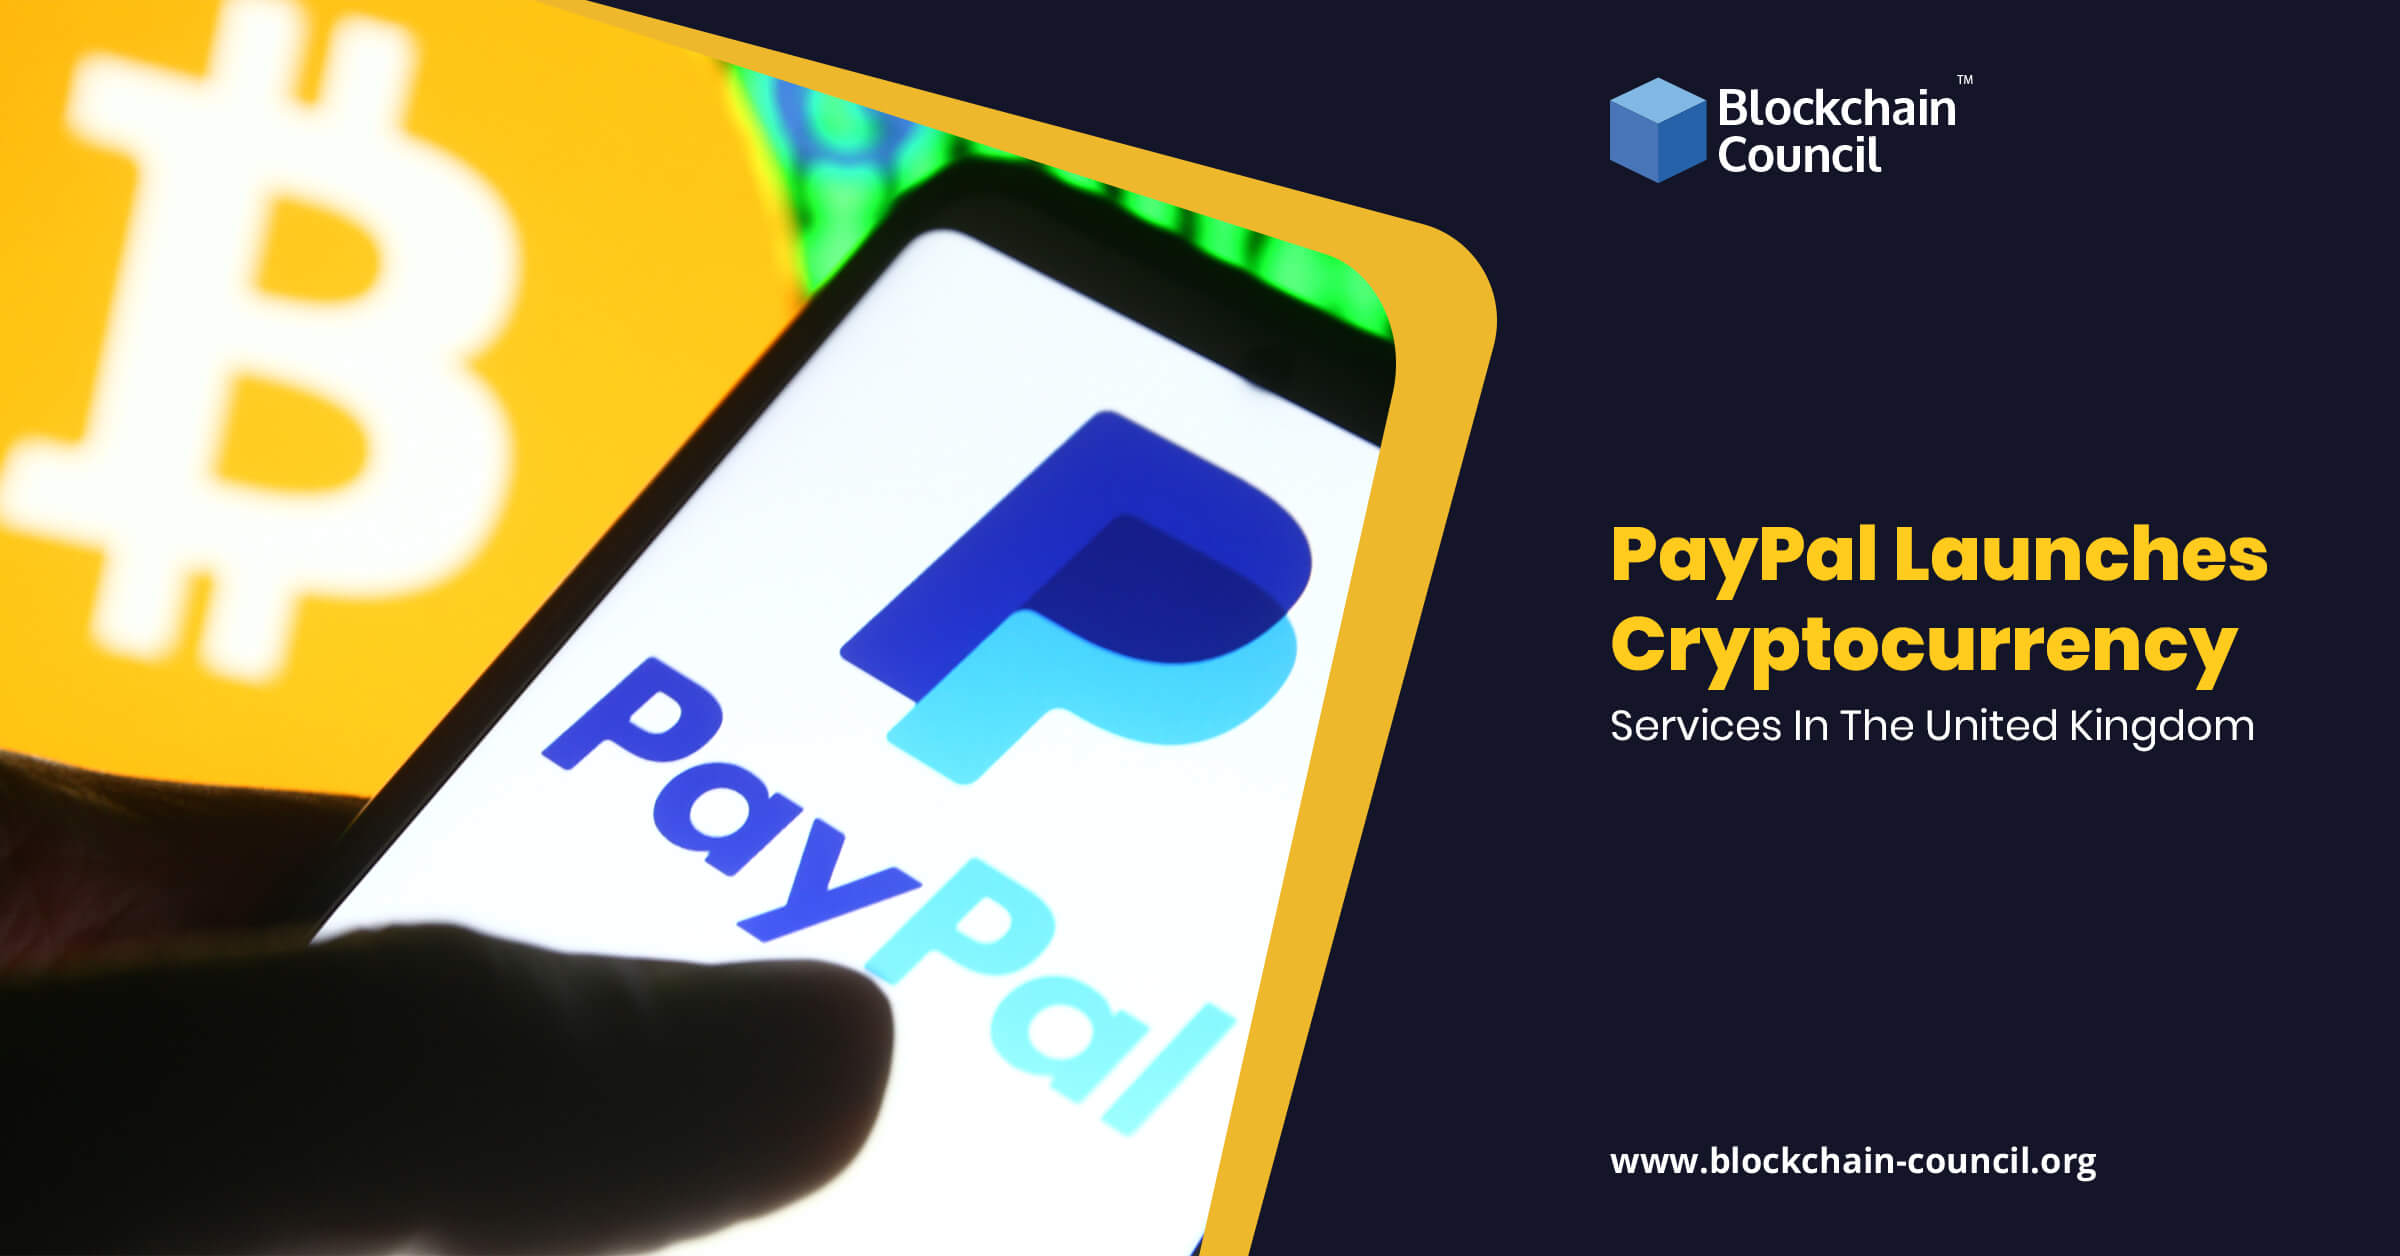 PayPal Launches Cryptocurrency Services In The United Kingdom